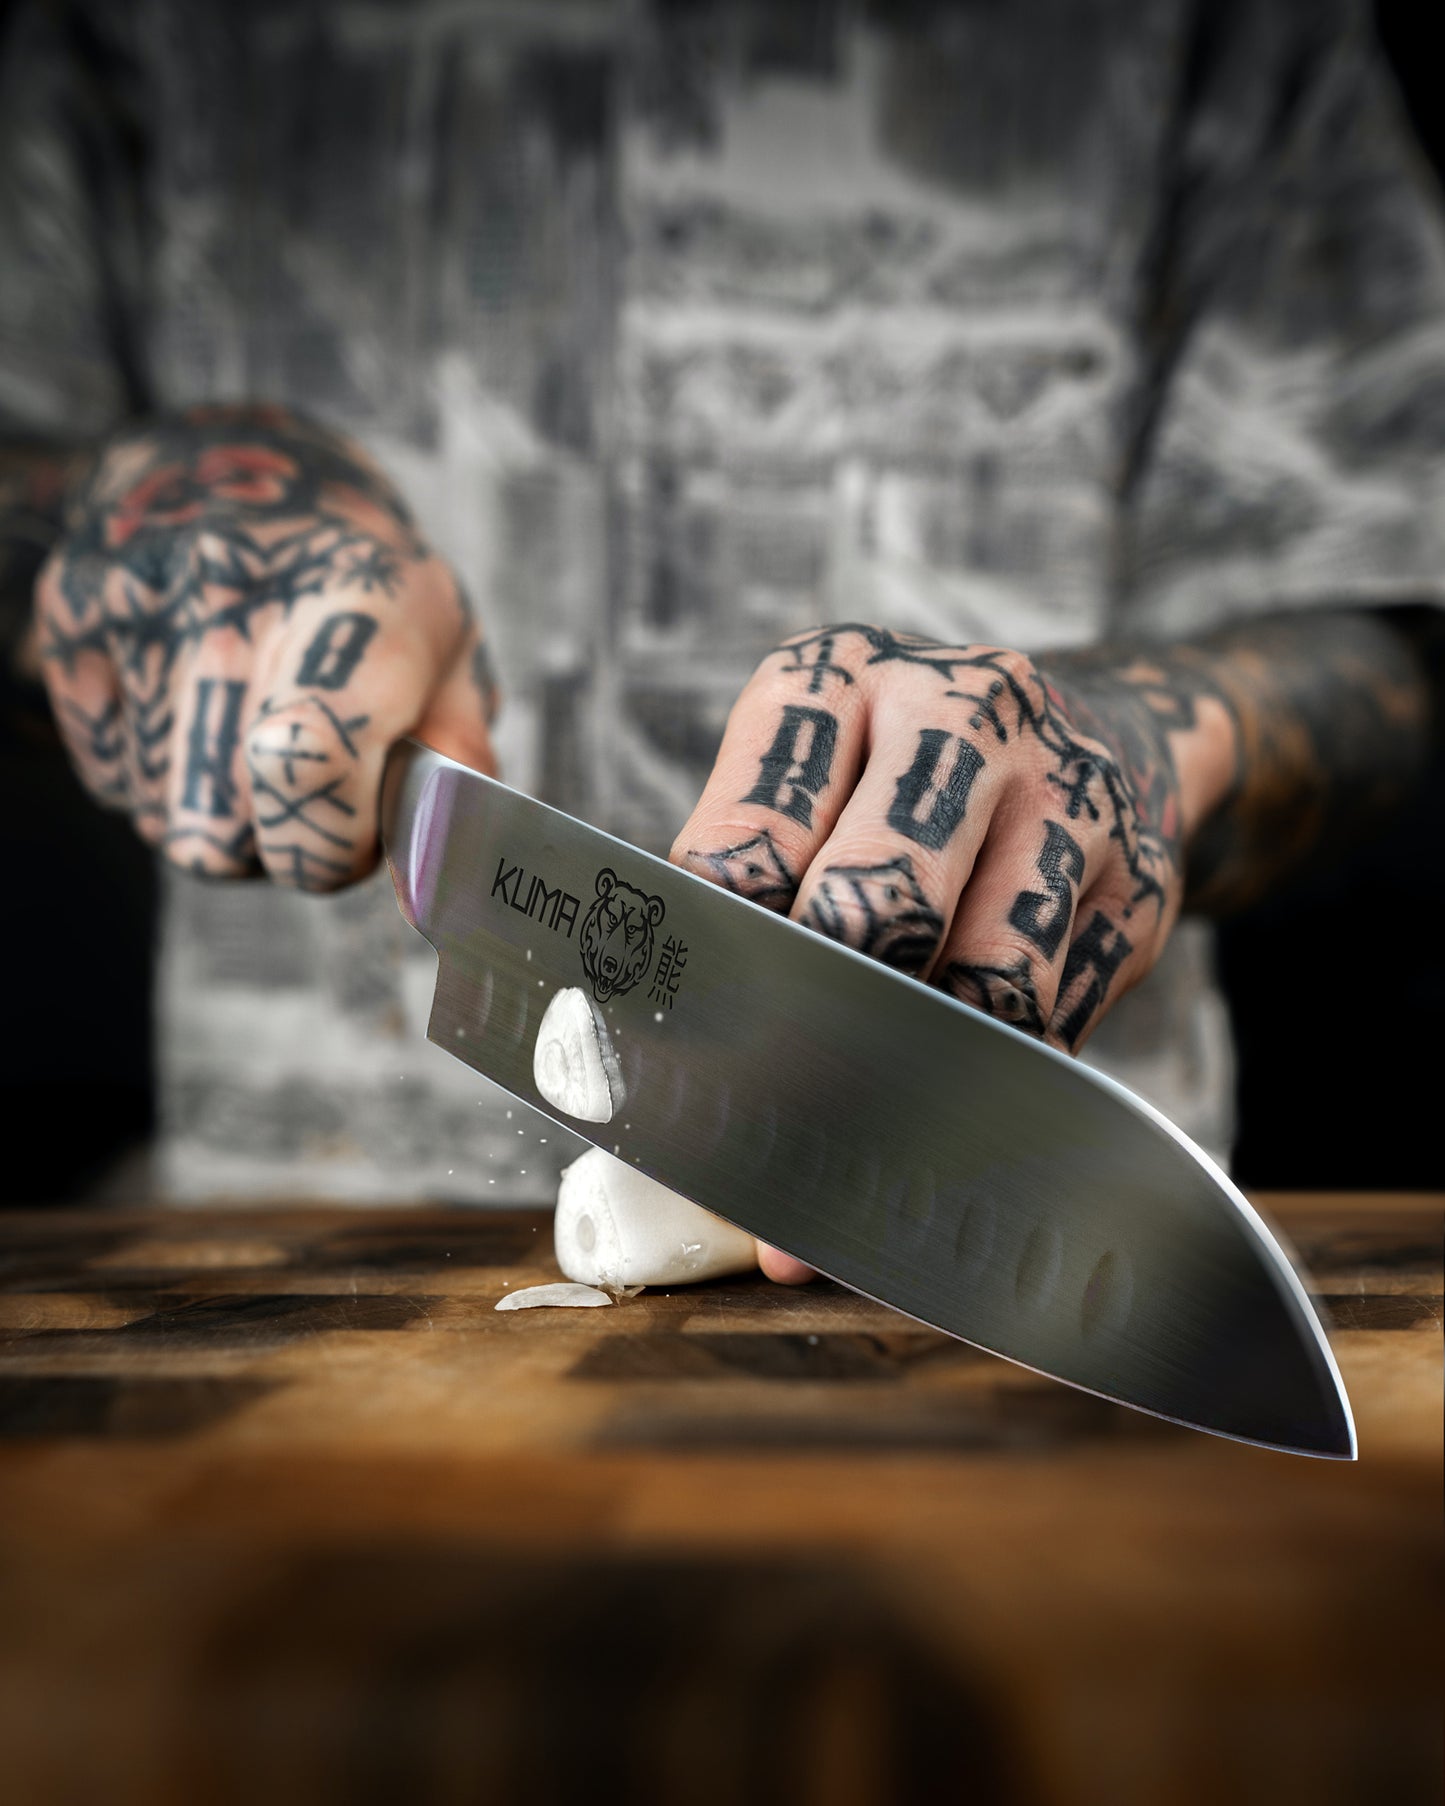 KUMA Santoku Kitchen Knife - Classic Series - 7" Japanese Style Chef's Knife for Fish, Meat, and Vegetables